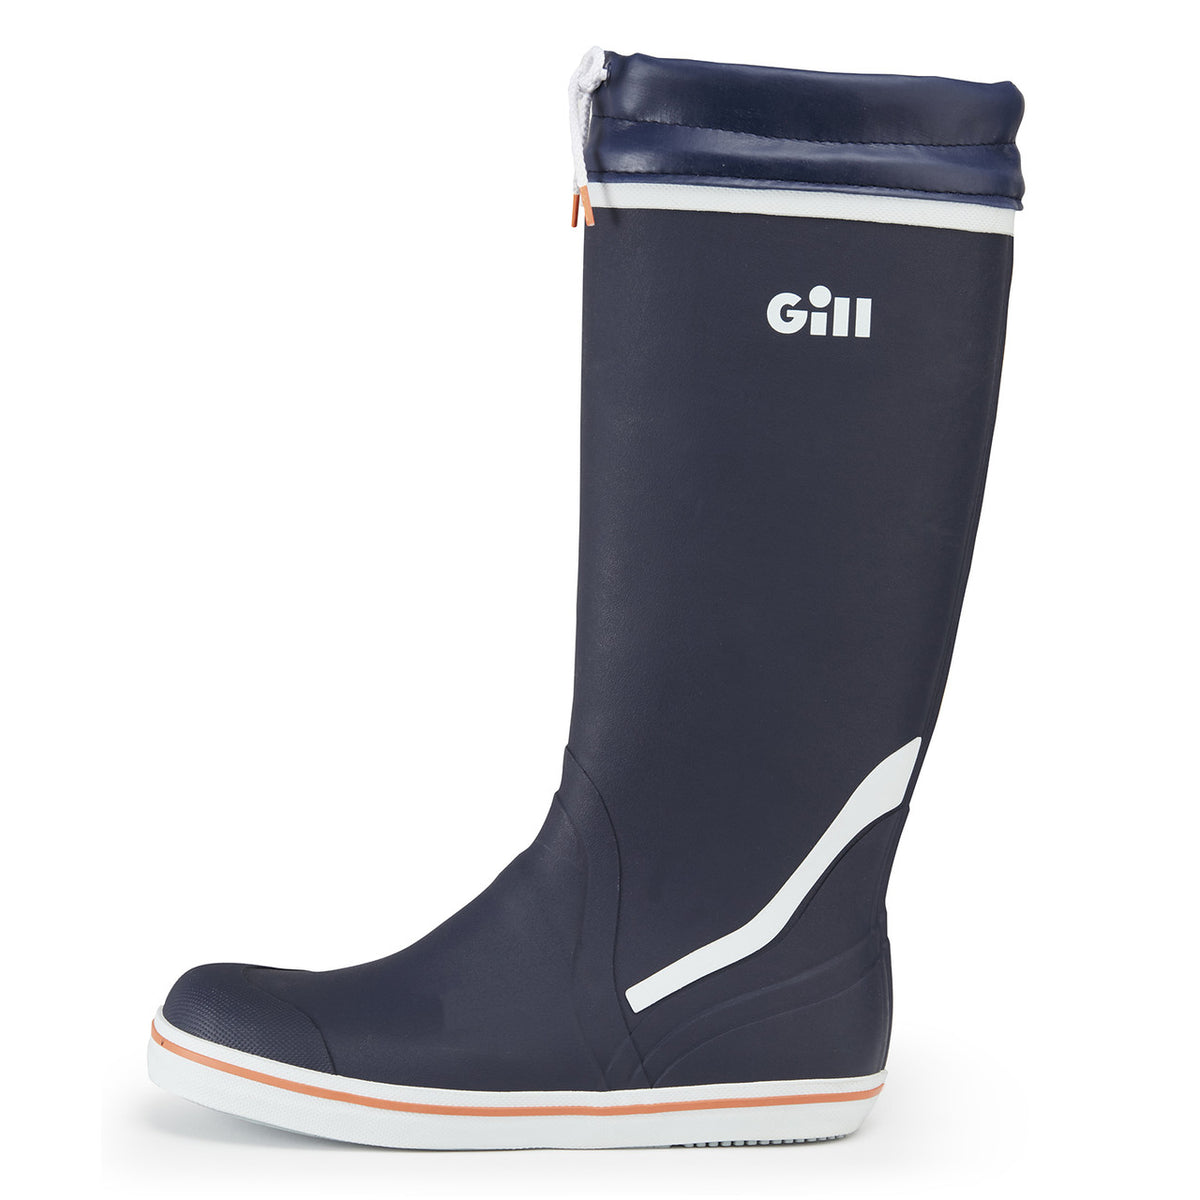 GILL Tall Yachting Boots